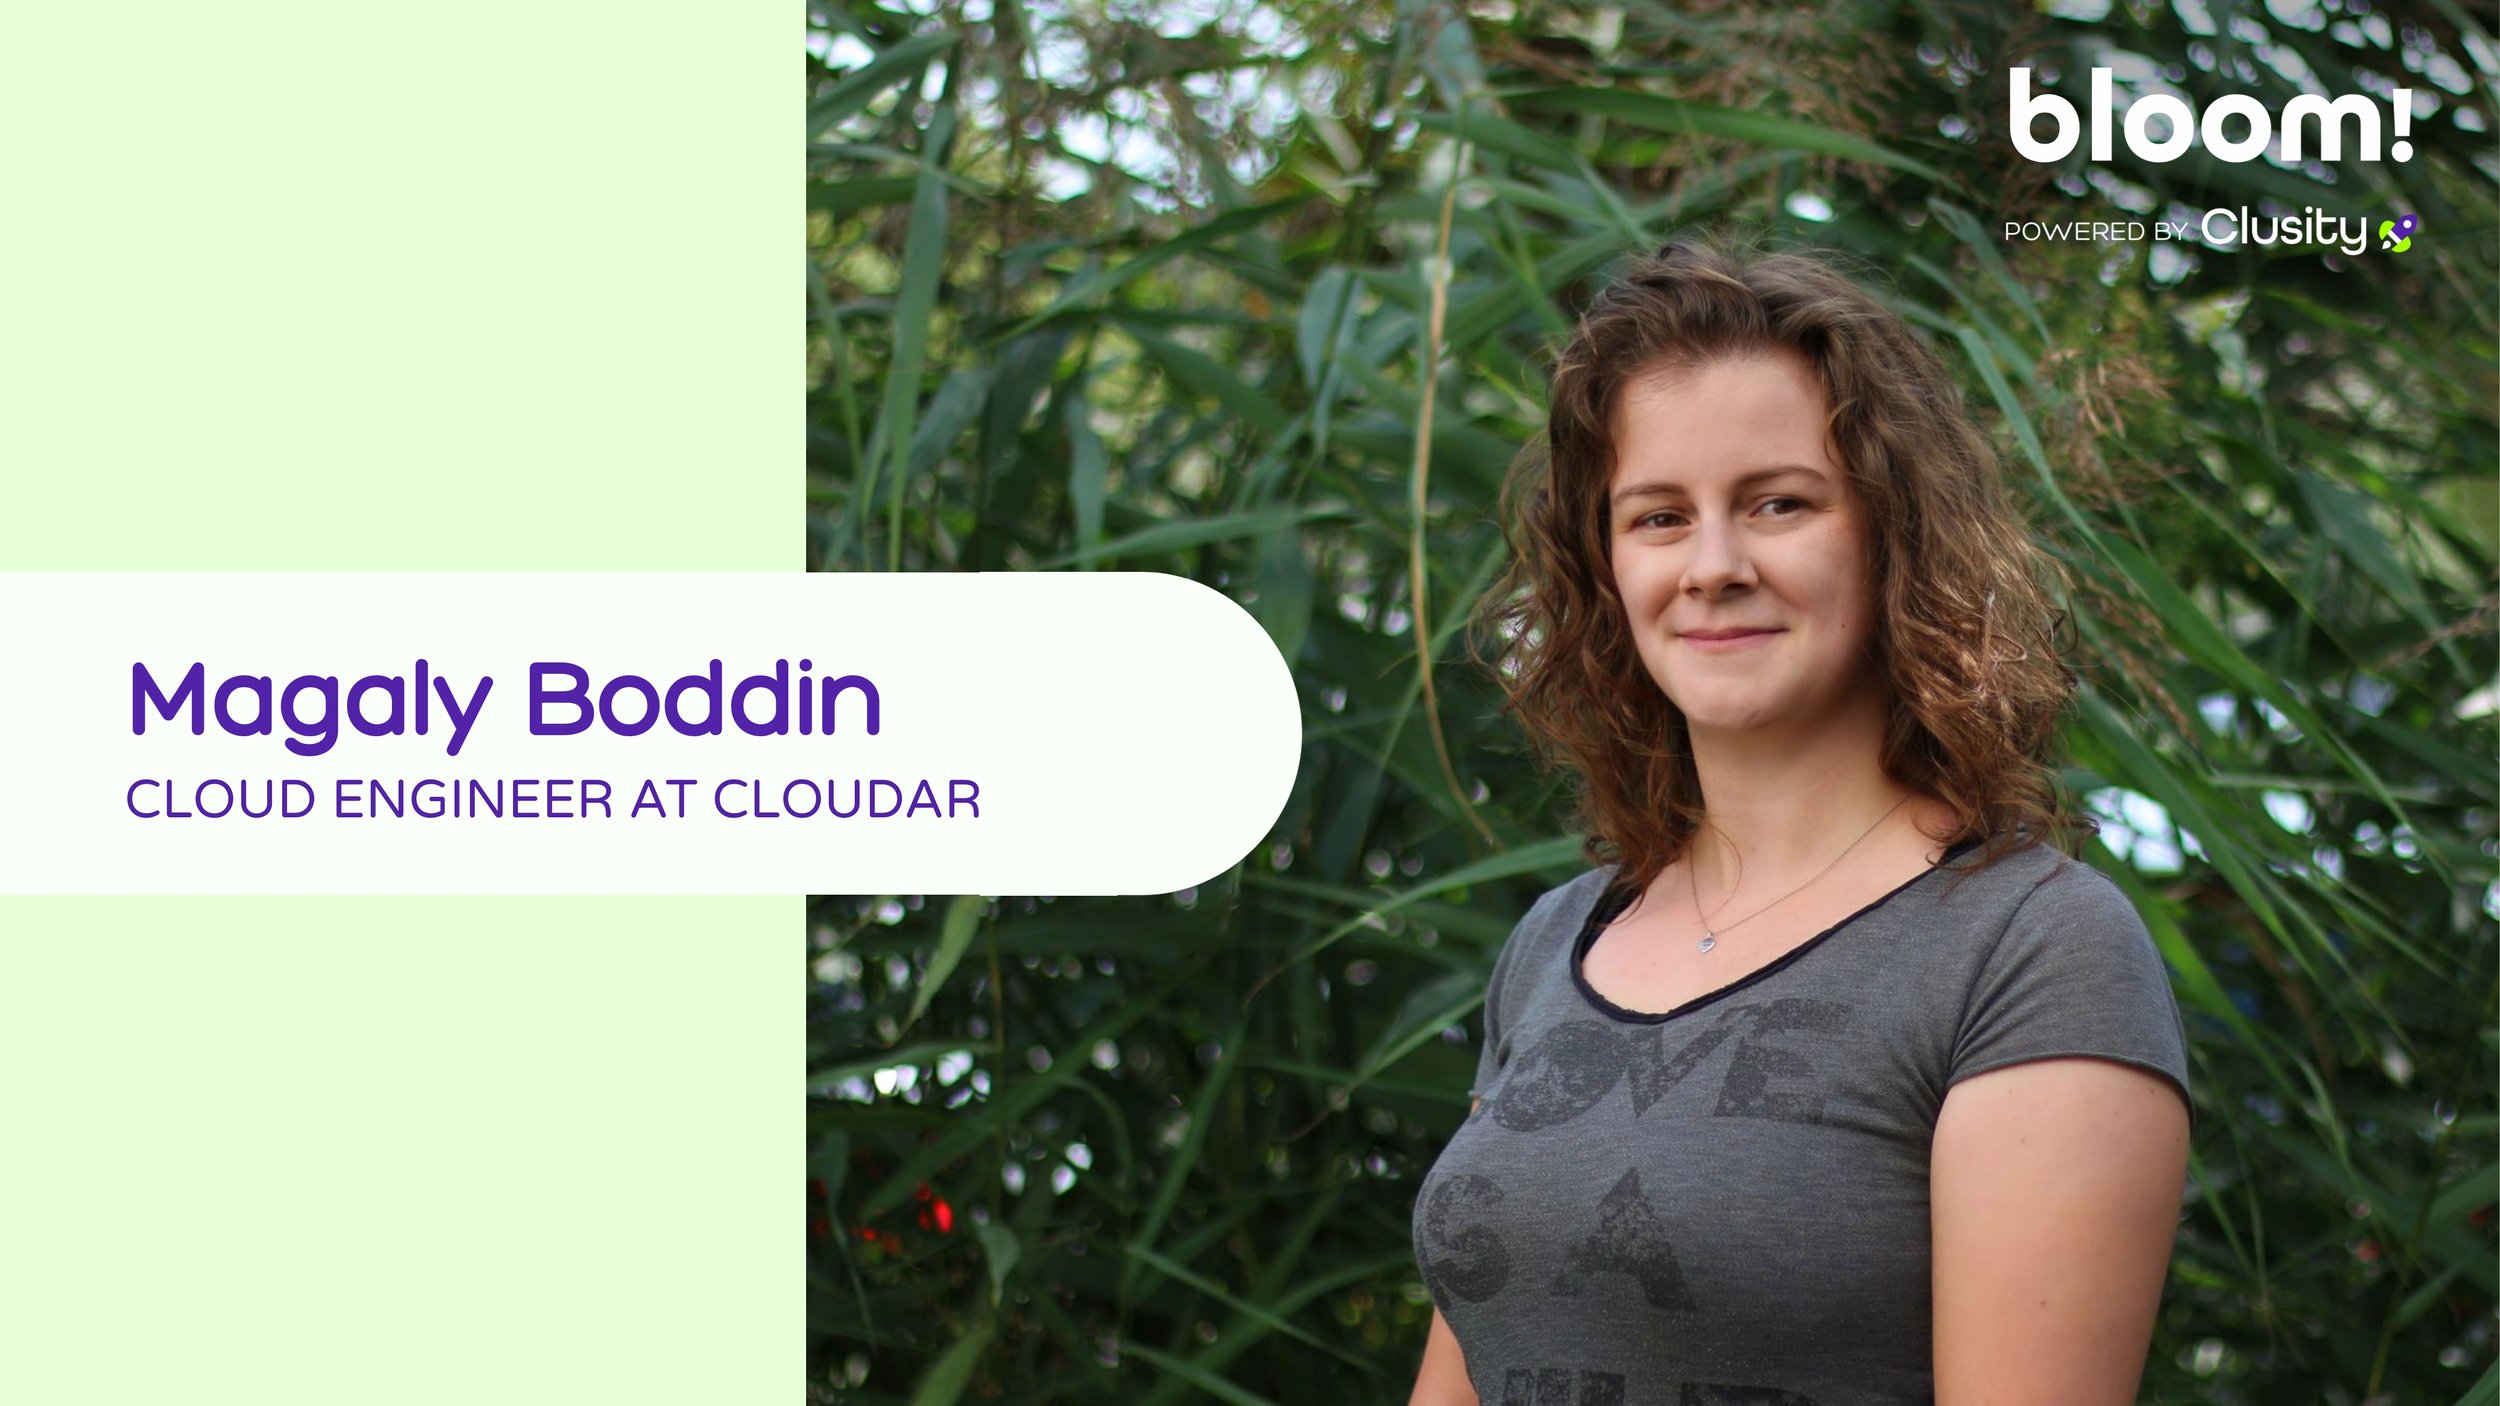 Bloom: Magaly Boddin